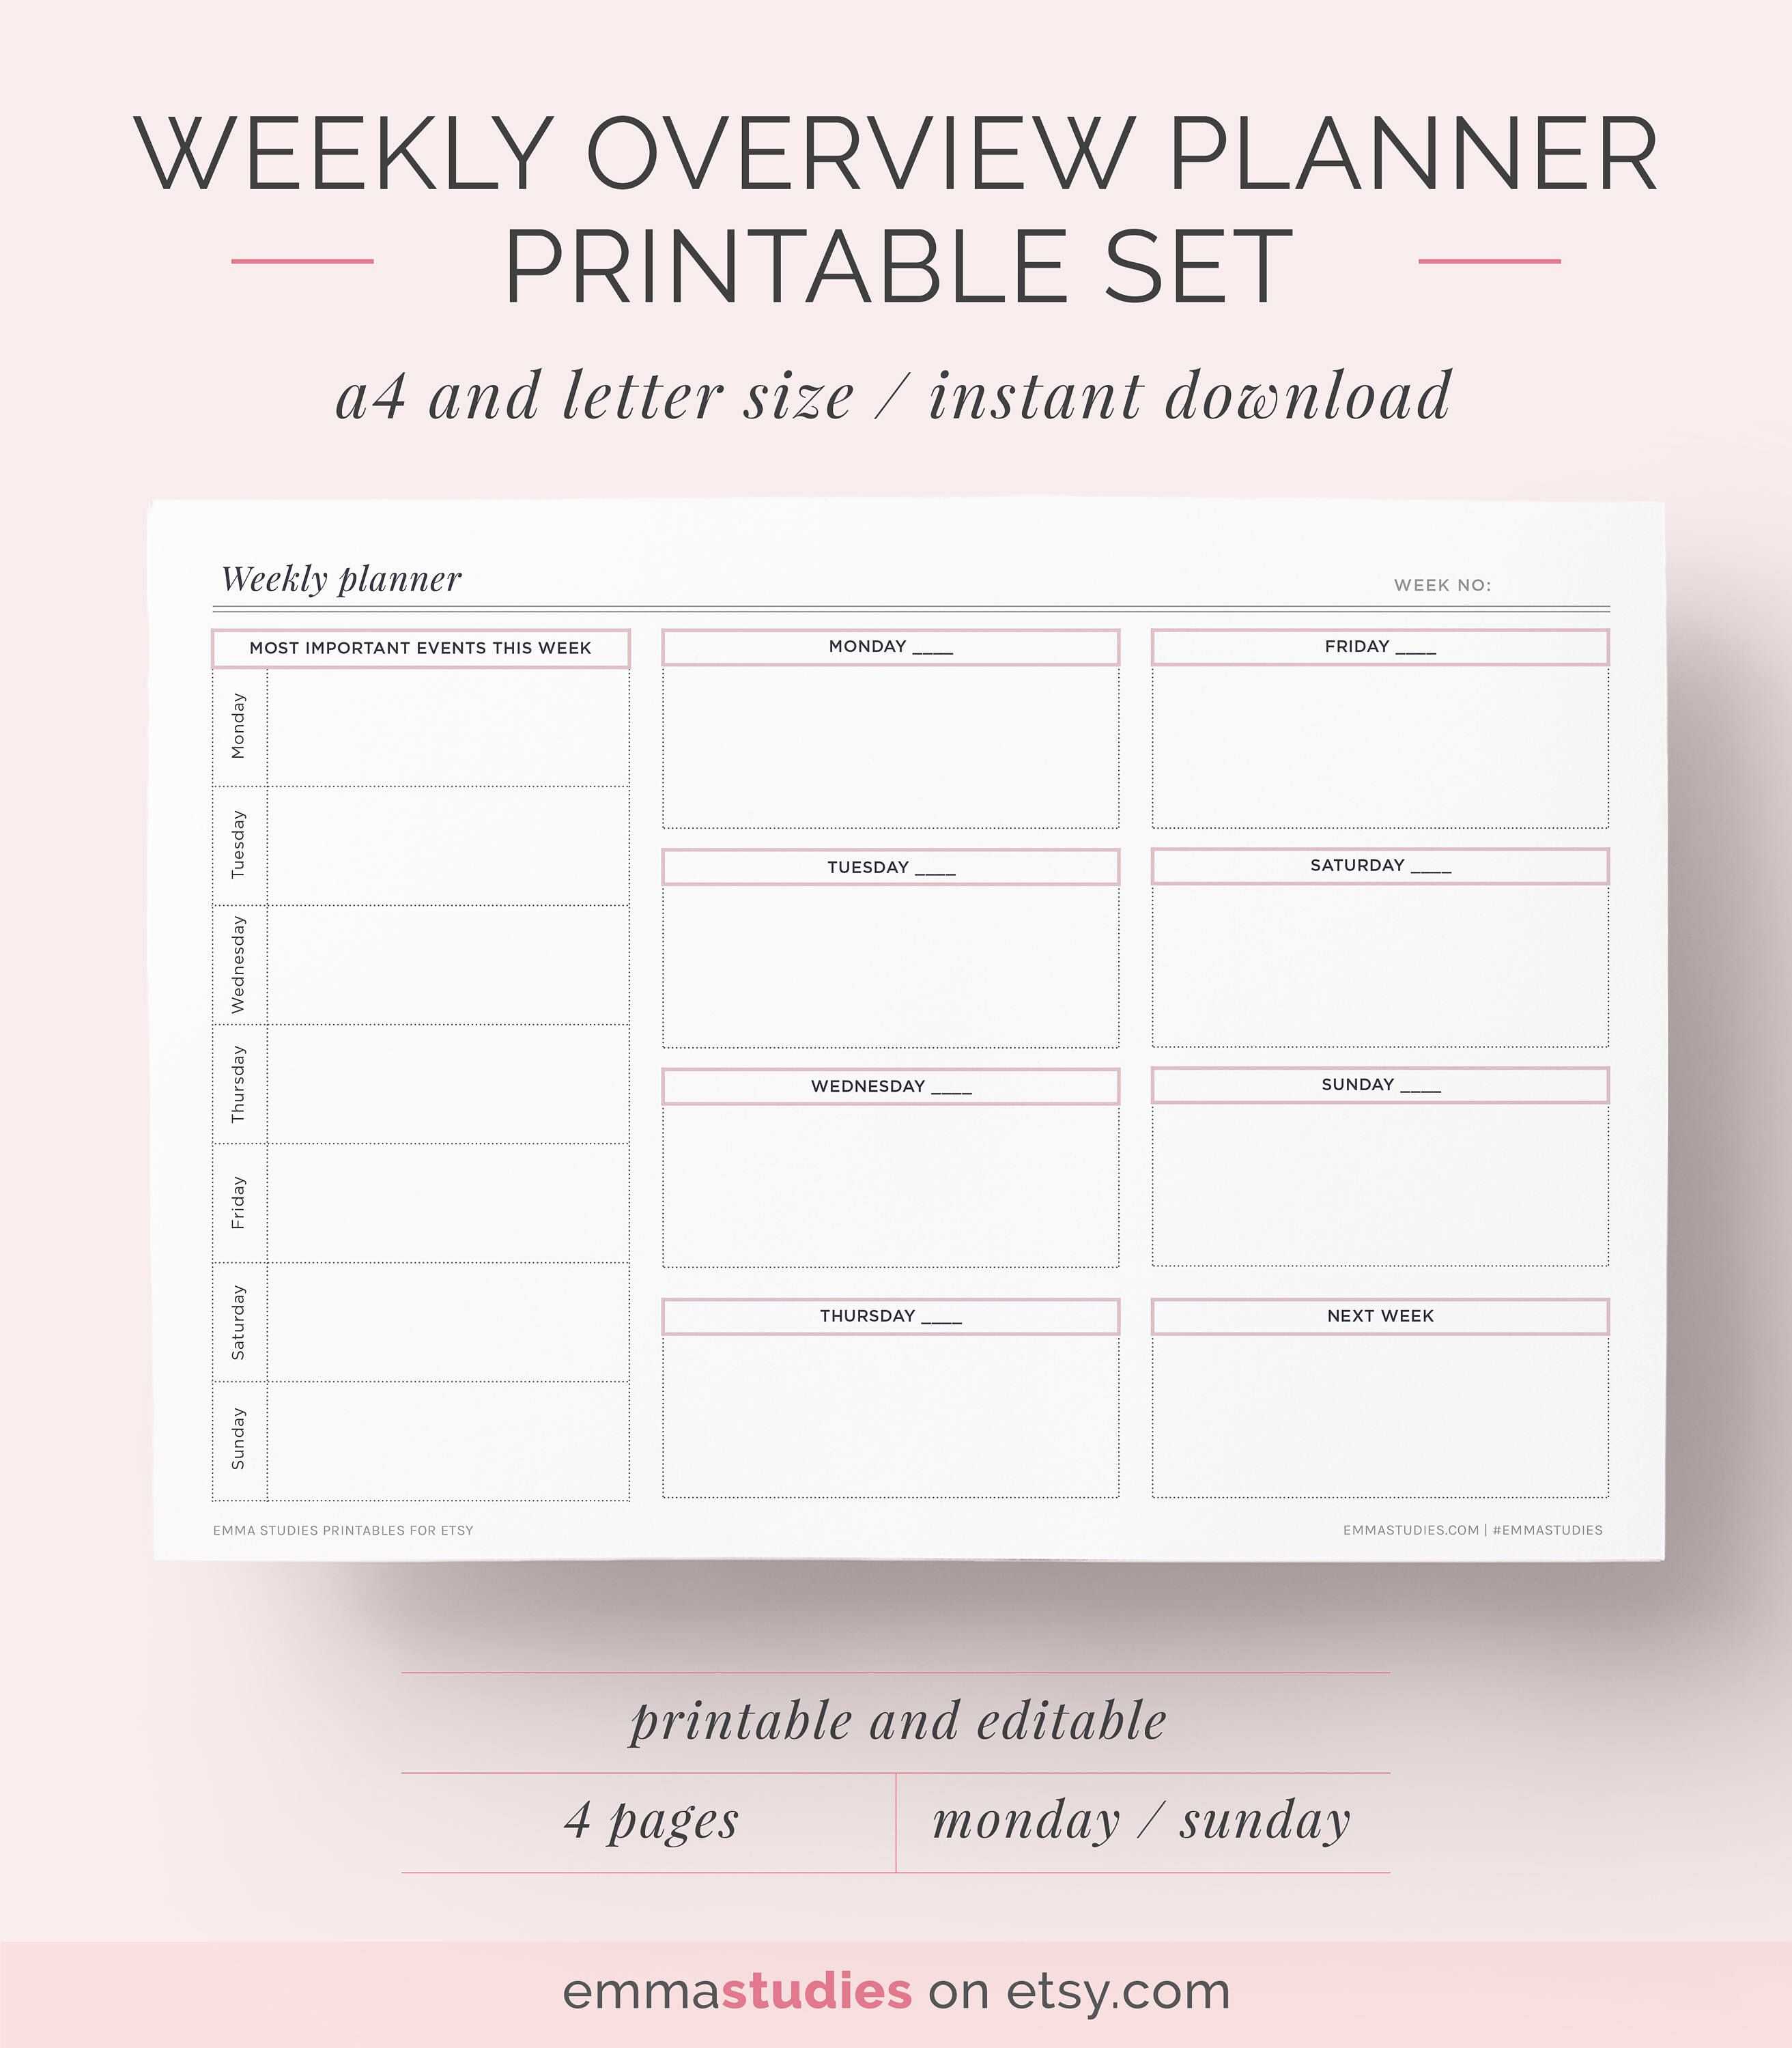 Student Budget Worksheet as Well as Weekly Overview Planner Printable Set